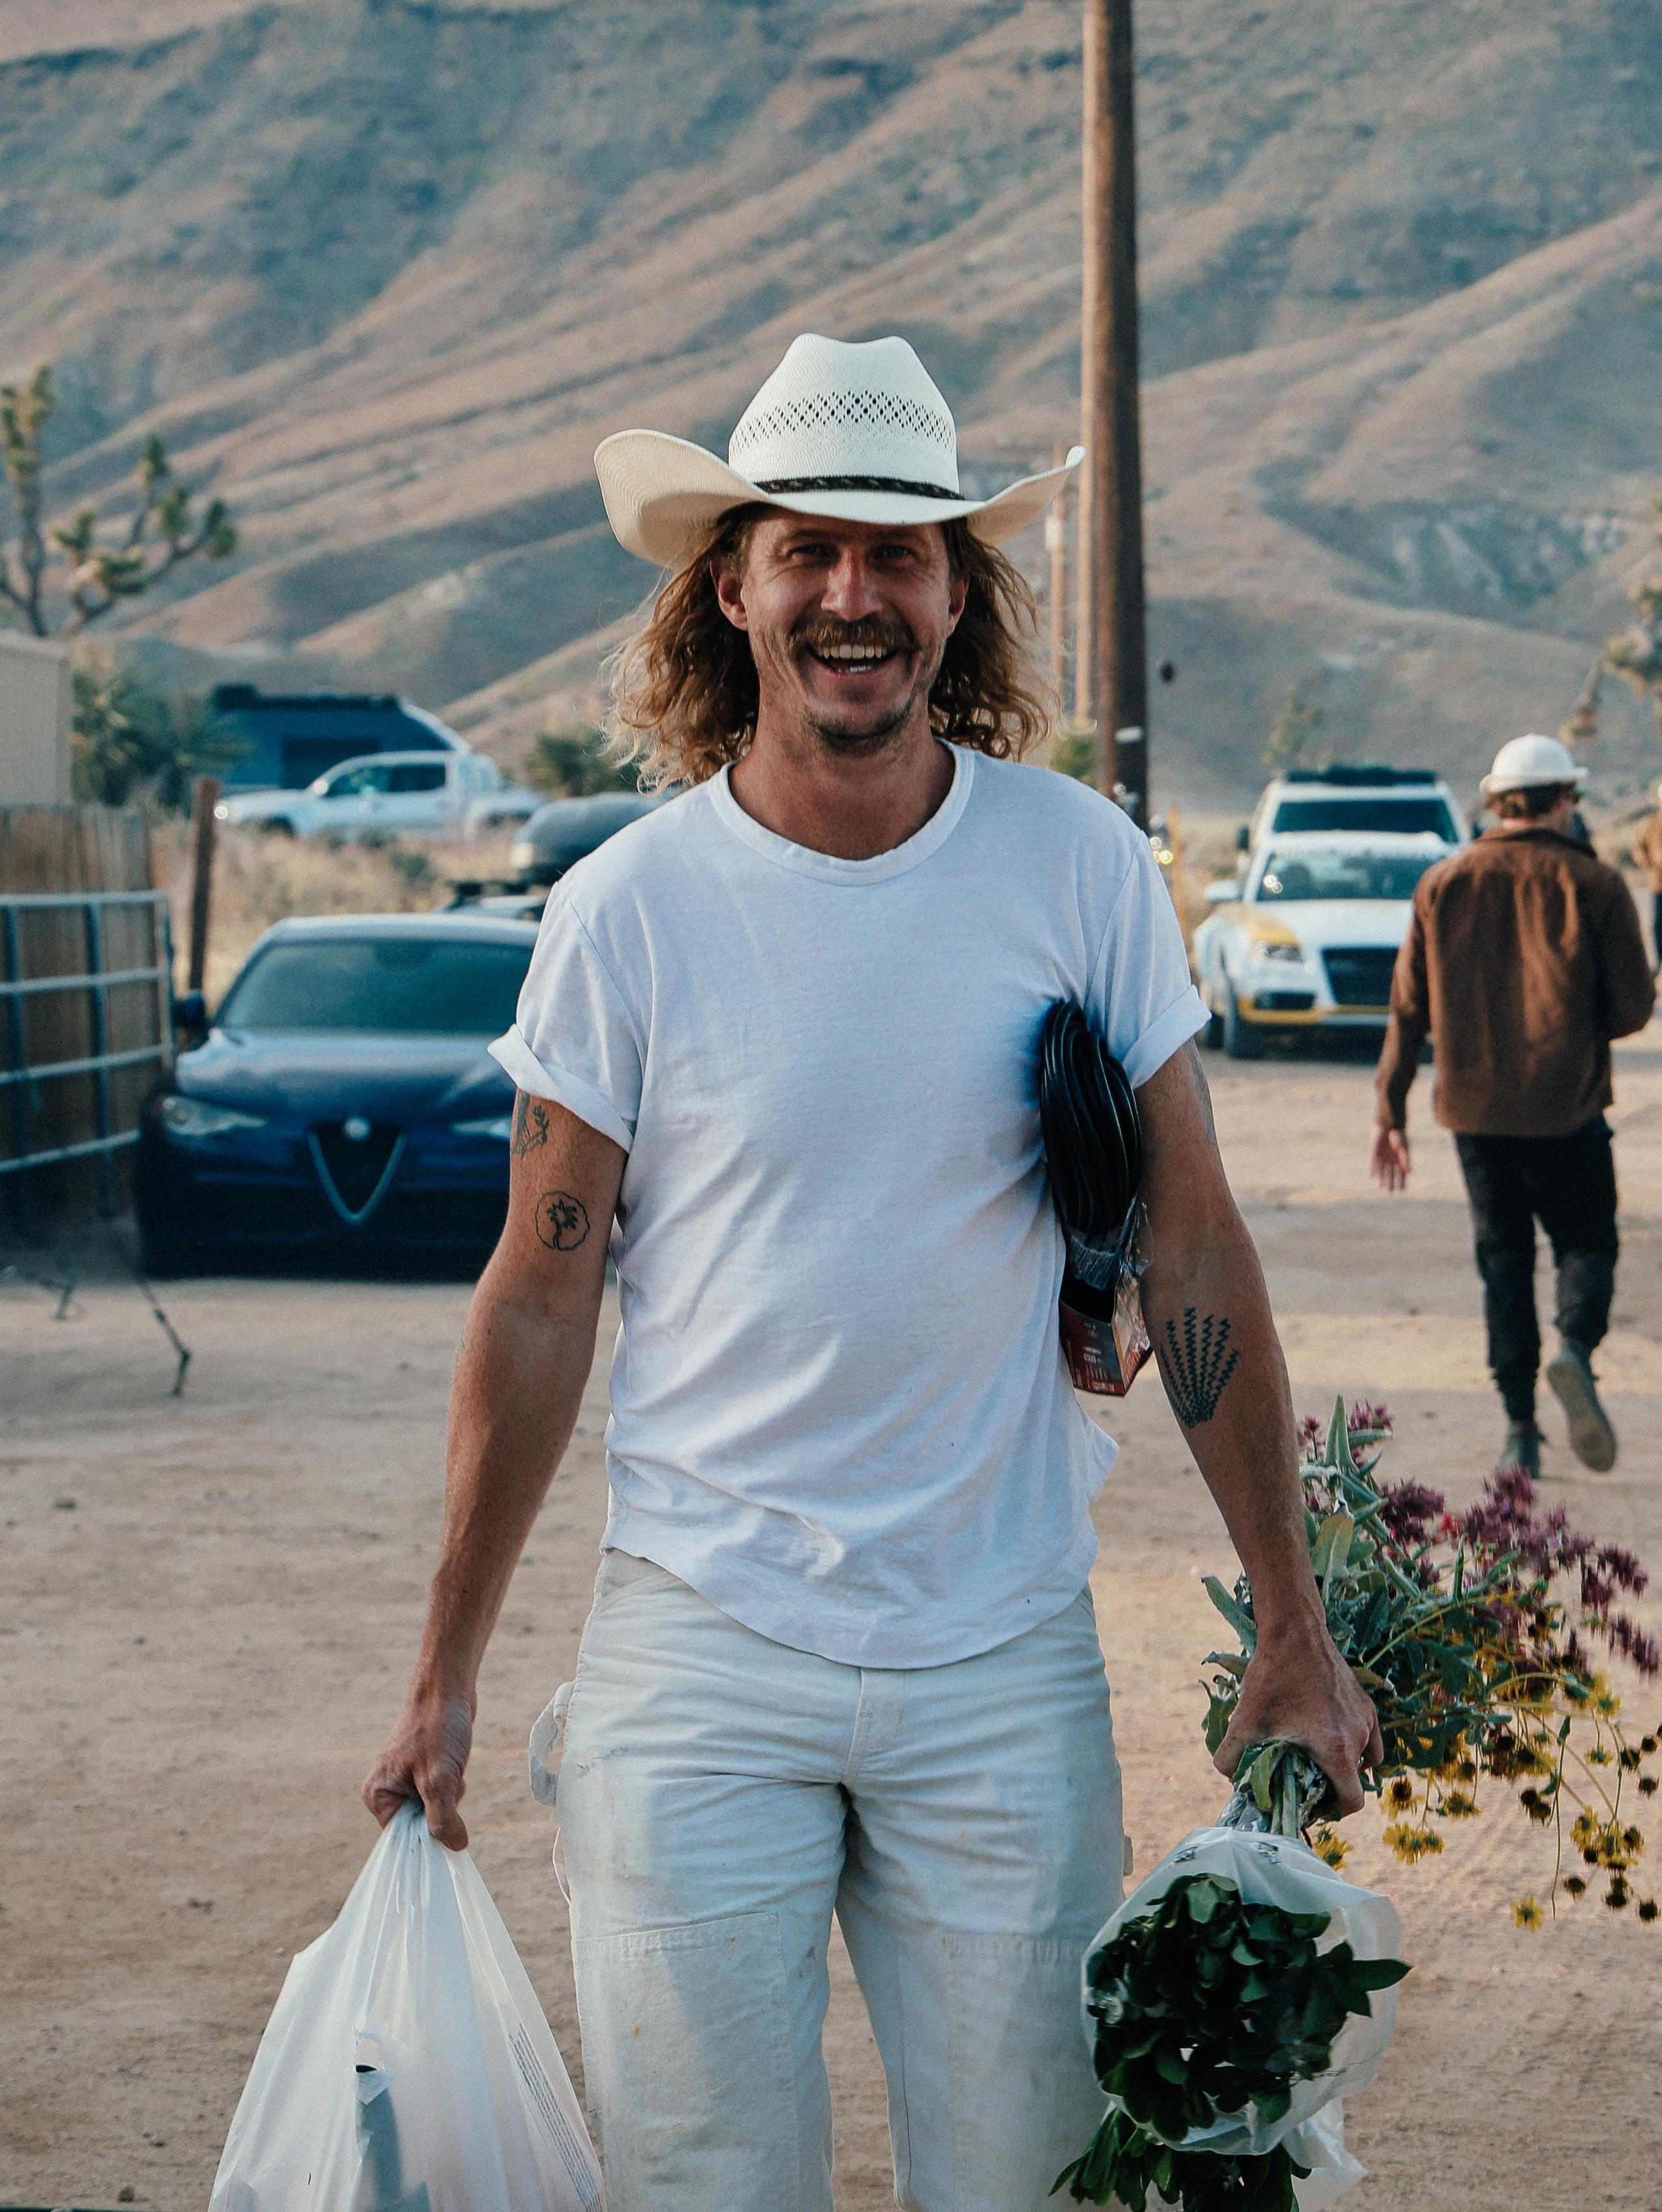 Man in white outfit and white cowboy hat laughing and smiling in Pioneertown